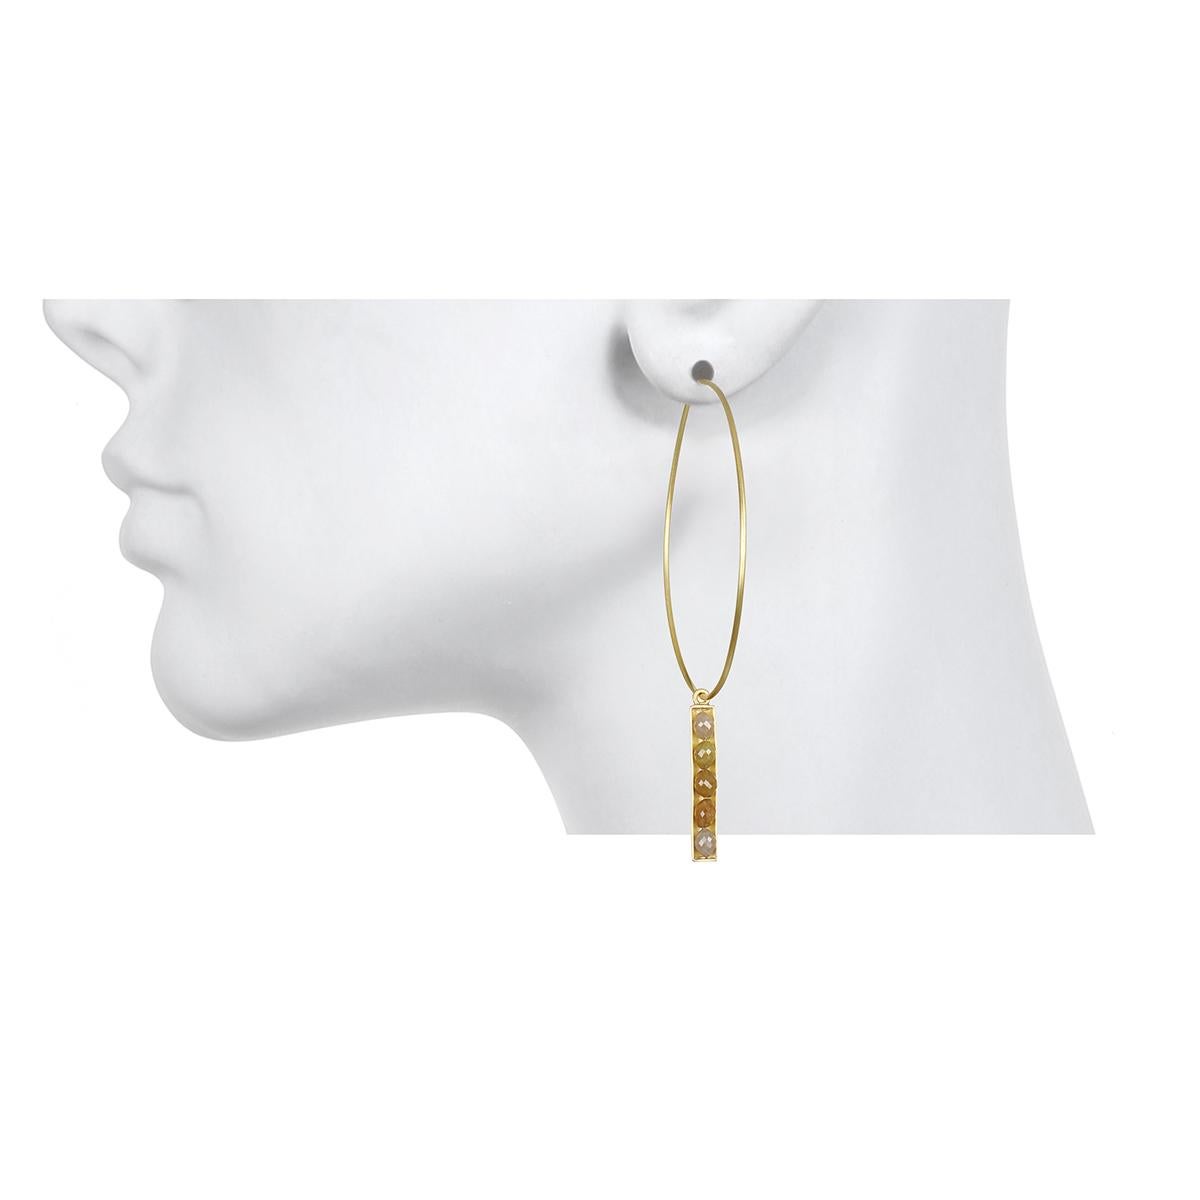 Elegant and chic hoop earrings in 18k gold with diamond bar drops.  The bars are reversible with the sparkle of yellow faceted diamonds on one side and matte gold on the other.  Wear with our favorite wire hoops in a variety of sizes. 
 
Earrings as